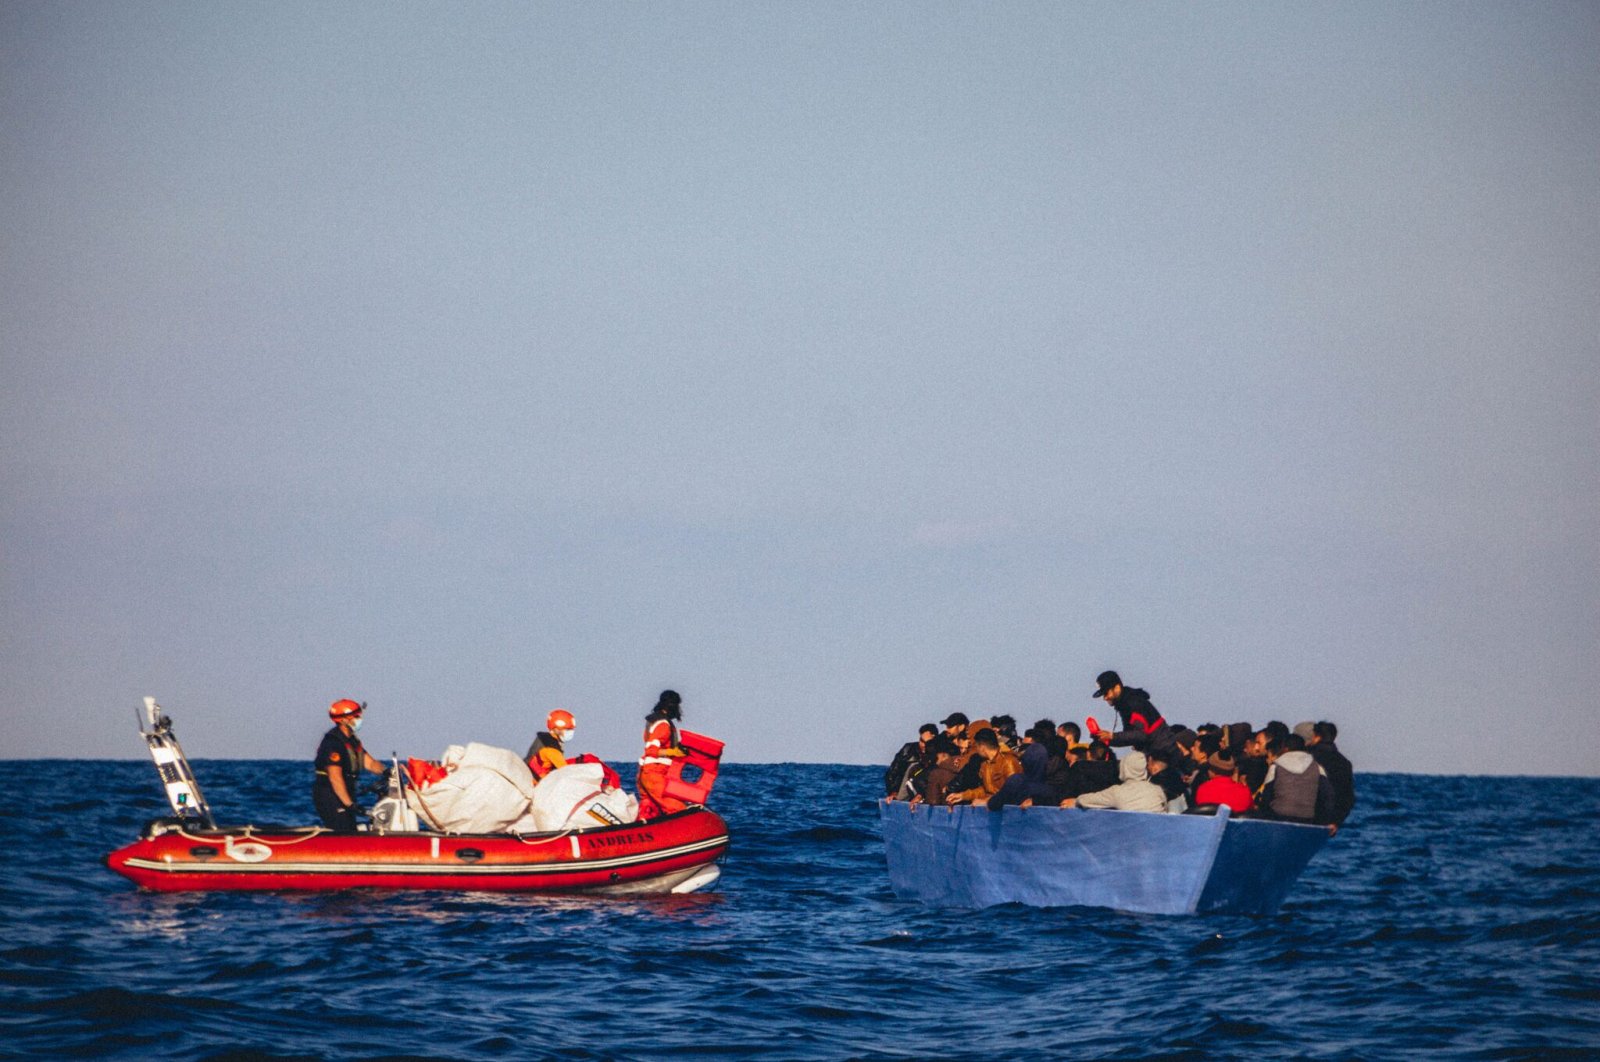 Members of Sea Eye on a rubber boat rescue people from a small wooden boat in distress off the Libyan coast, Monday, April 6, 2020. (AFP Photo)